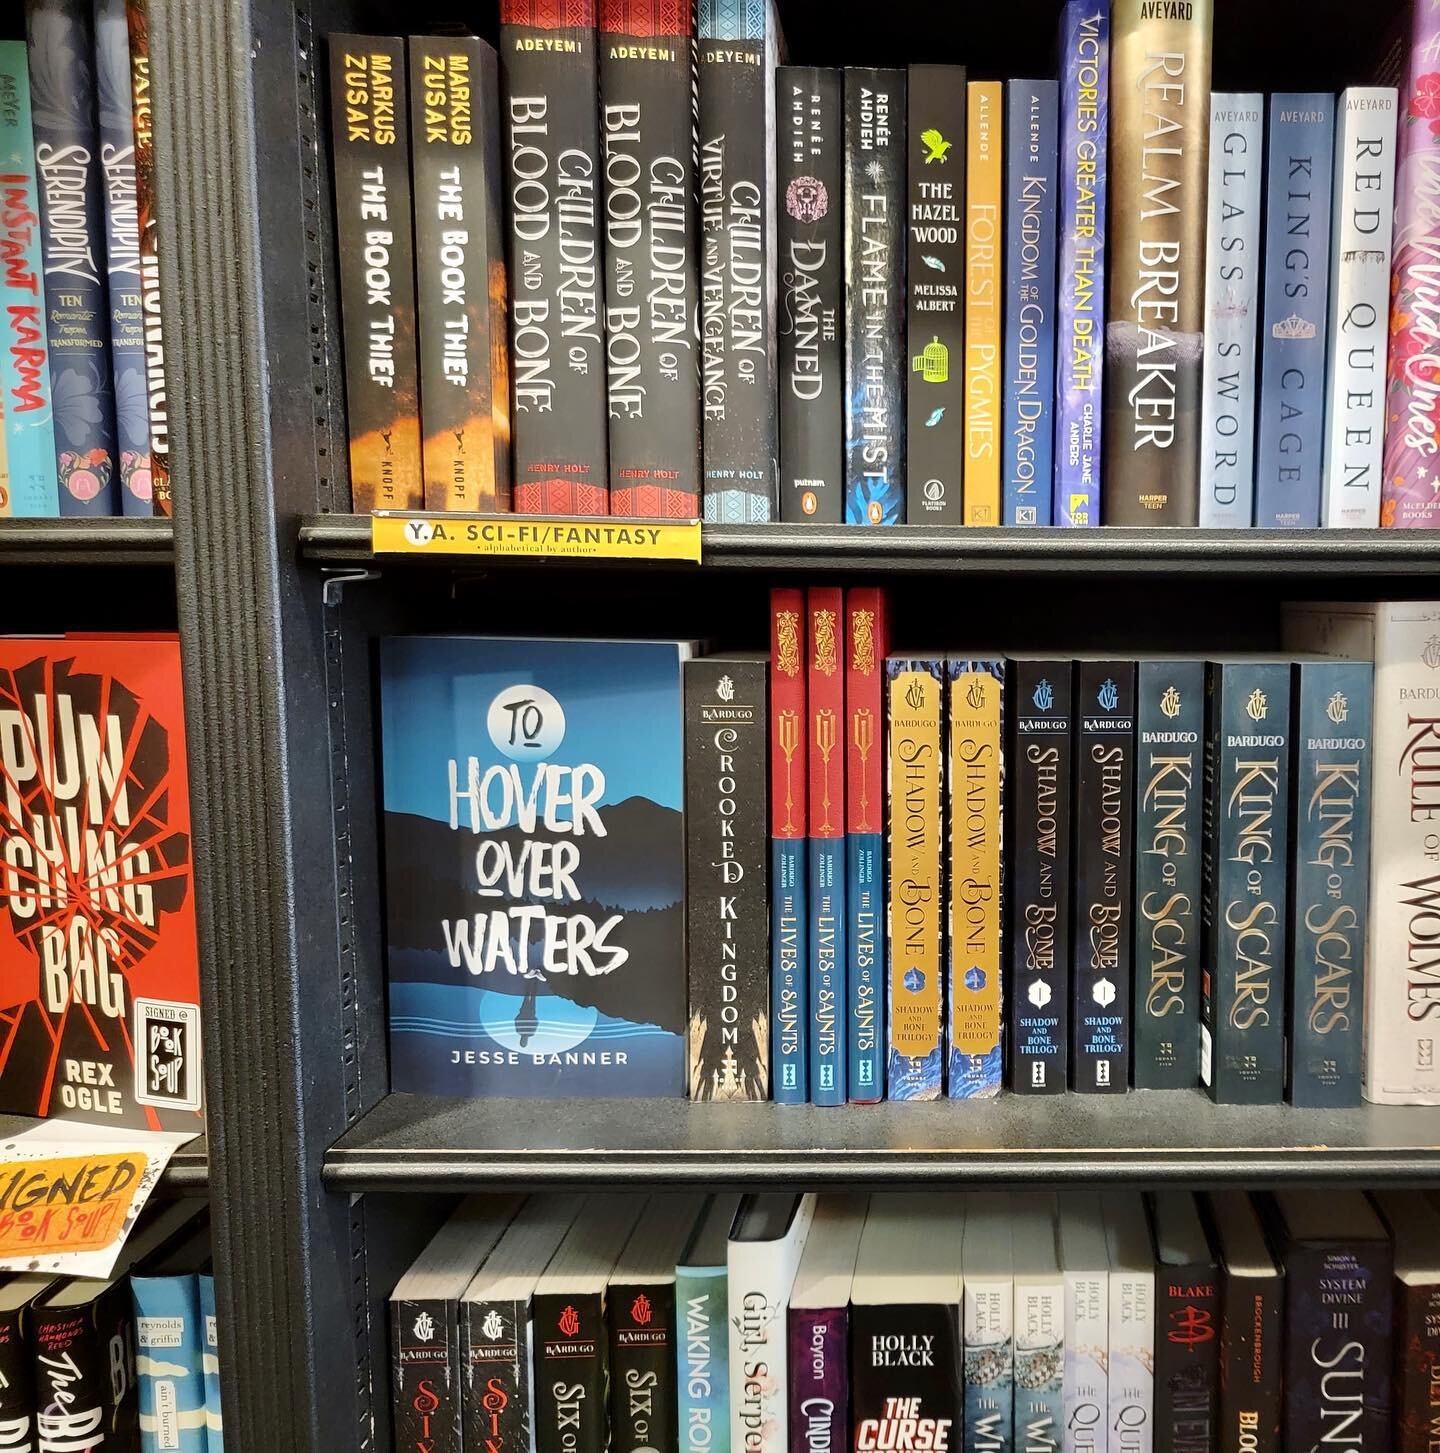 Excited to announce that To Hover Over Waters is available at @booksoup in West Hollywood